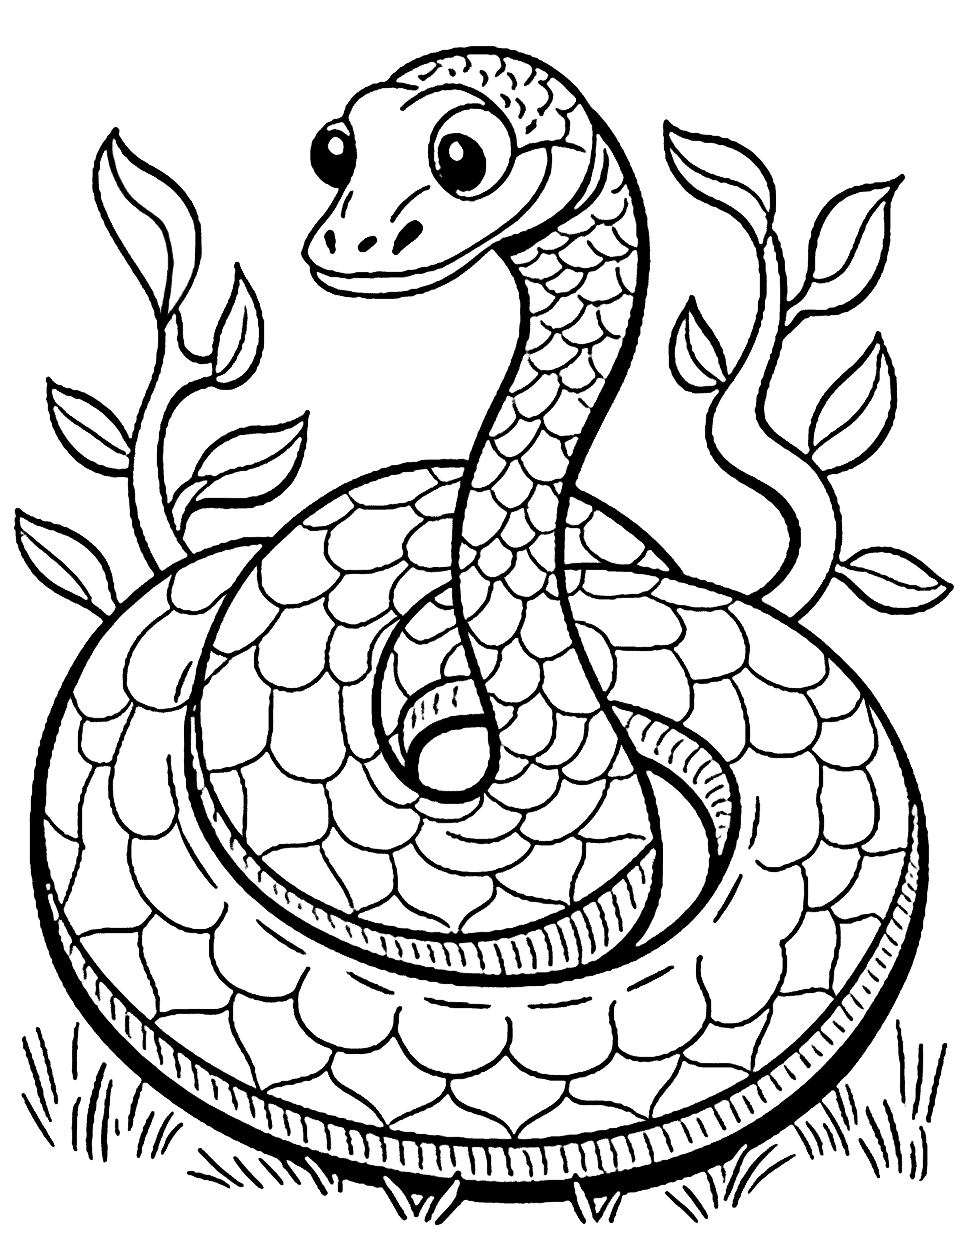 Jungle Snake Animal Coloring Page - A colorful snake coiled on a branch, ready to strike.